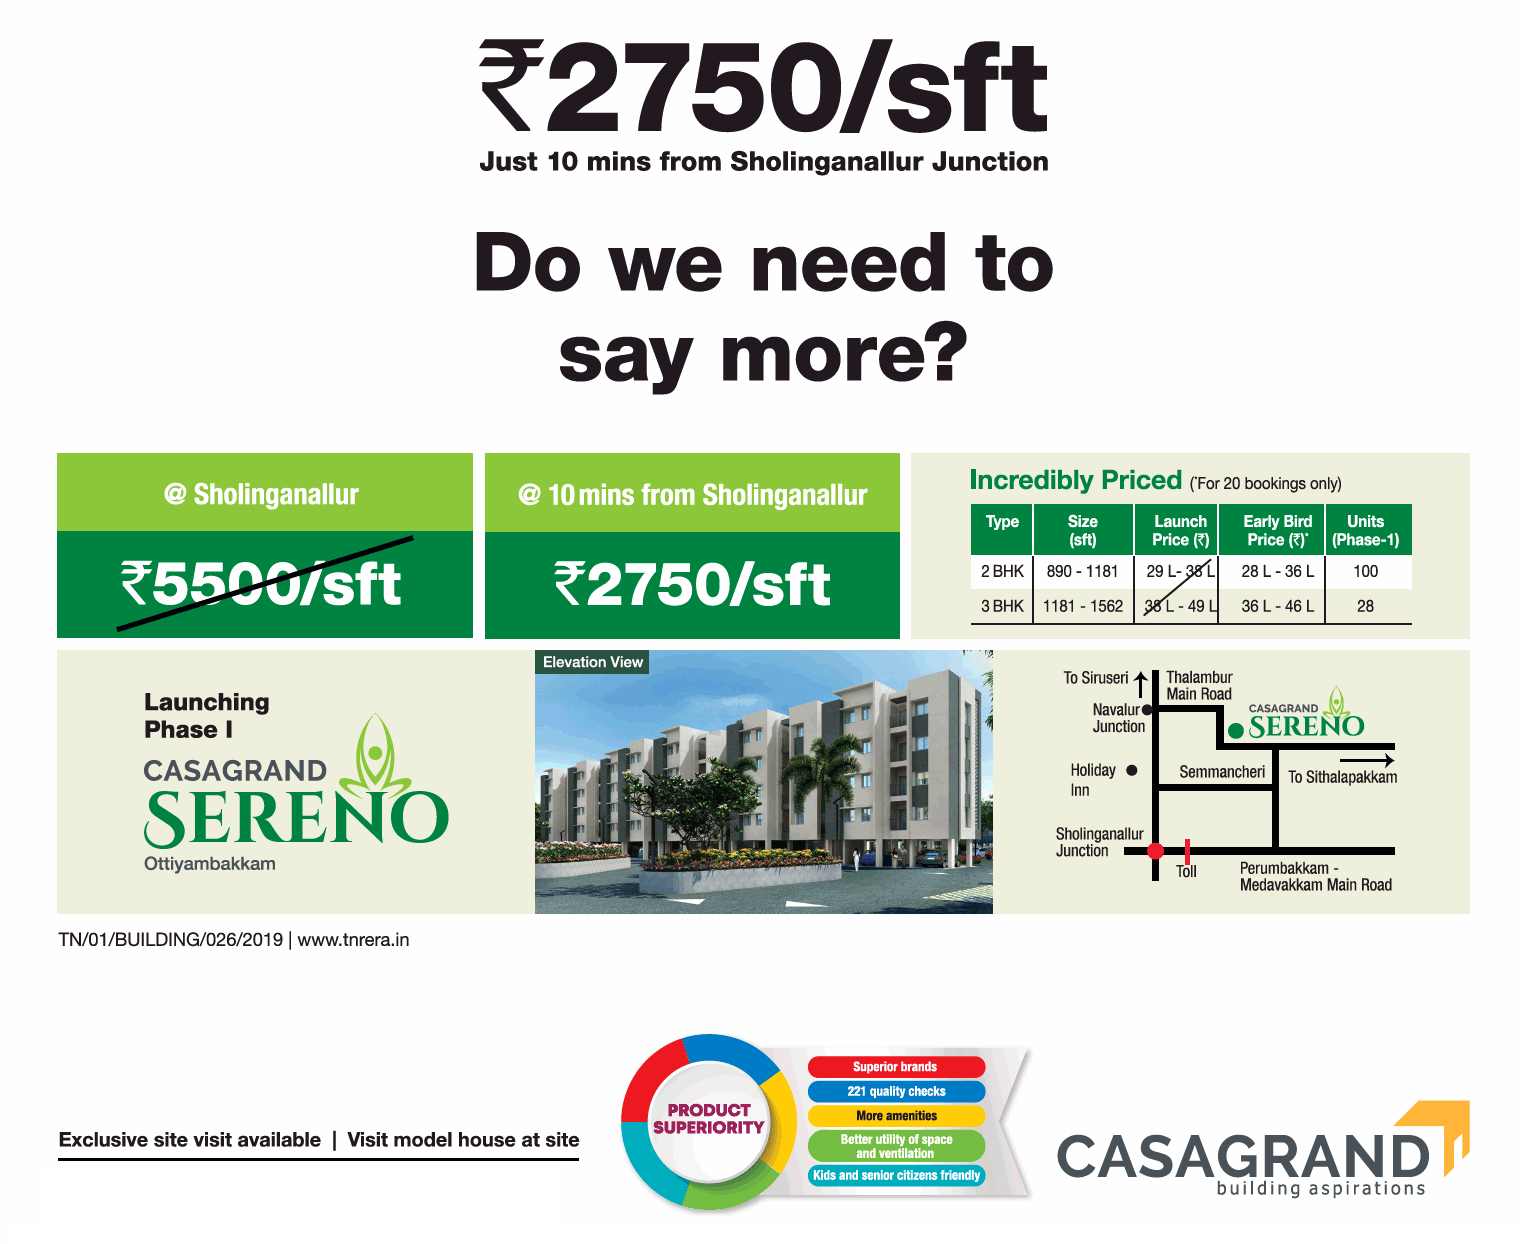 Book luxury apartments @ Rs 2750 per sqft at Casagrand Sereno in Chennai Update